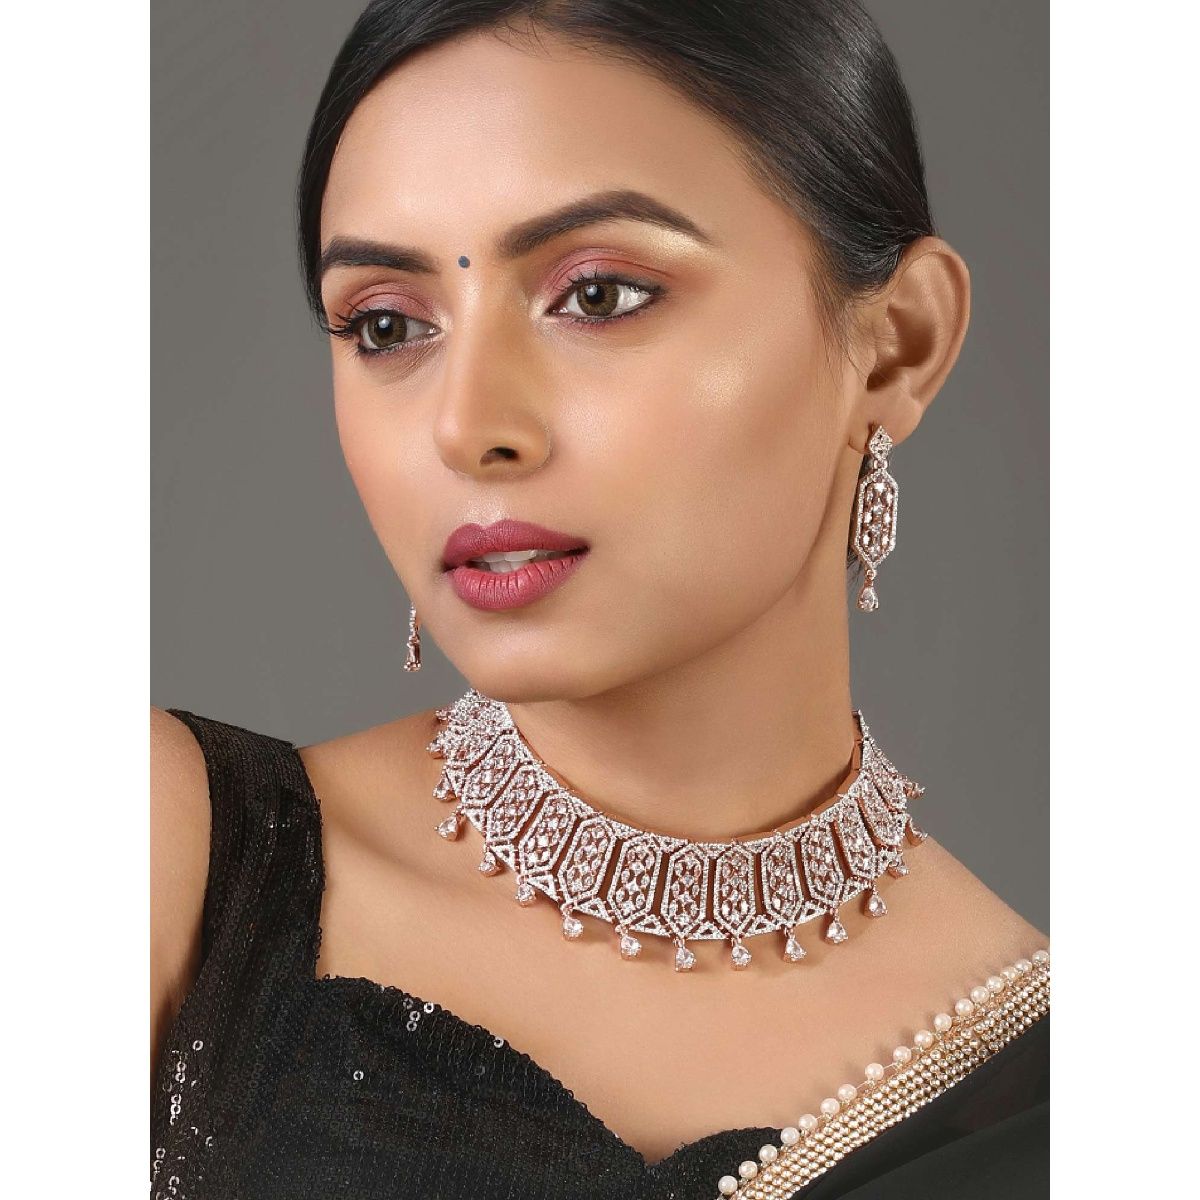 Designer High End Choker Necklace for Women 925 Sterling Silver CZ Pear  Jewelry | eBay